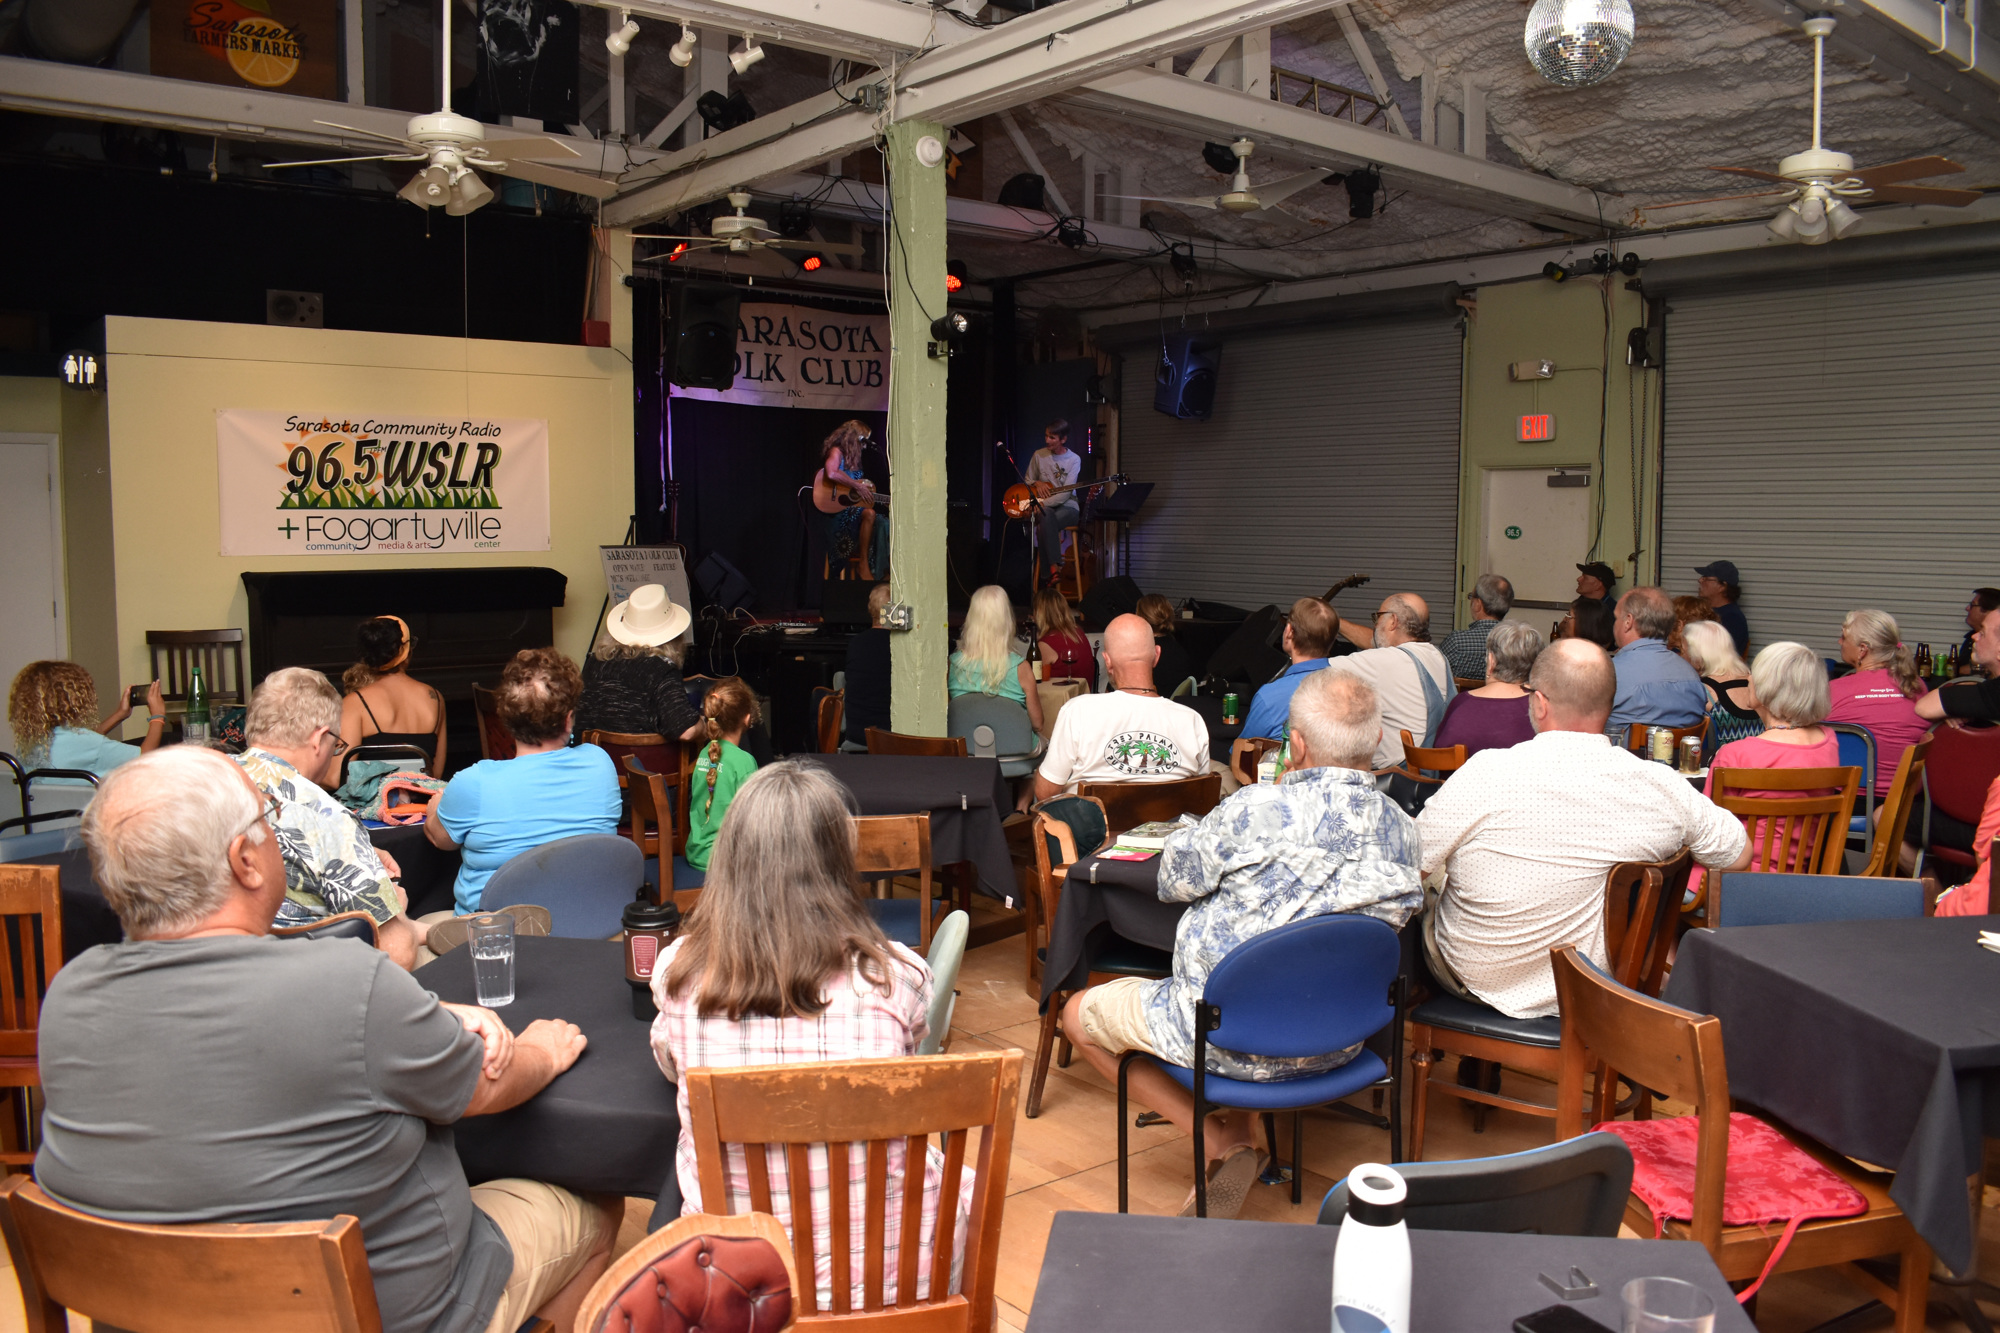 Fogartyville Community Media and Arts Center was packed July 29 for the Sarasota Folk Club's new monthly open mic and concert series at the center. Photo by Niki Kottmann